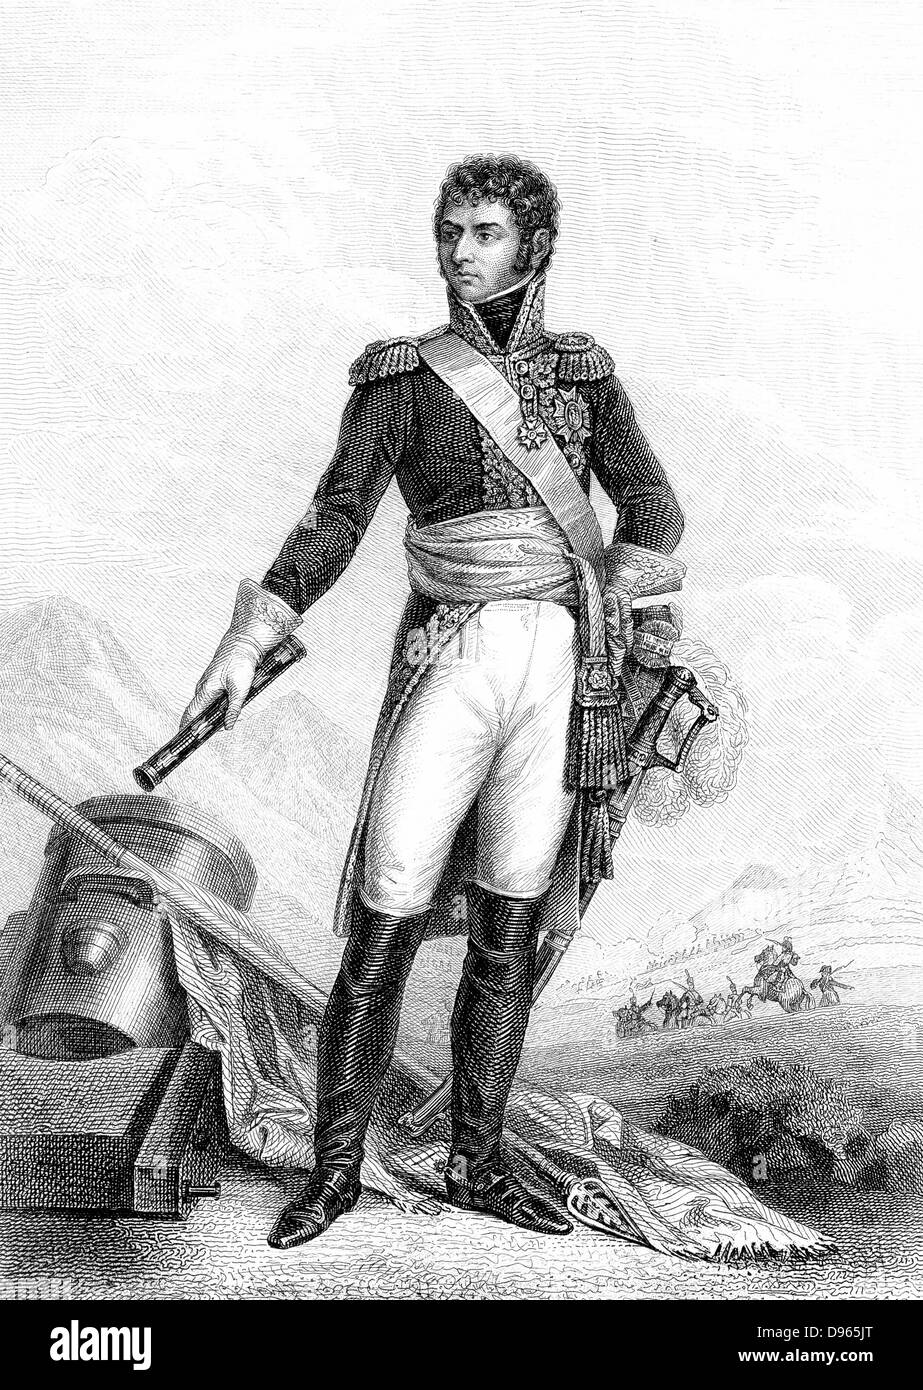 Jean Baptiste Jules Bernadotte  (1763-1844) French revolutionary soldier: Marshal of France under Napoleon: elected Crown Prince of Sweden 1810: King Charles XIV John (1818-1844). Engraving after portrait by FJ Kinson showing him standing beside a mortar. Stock Photo